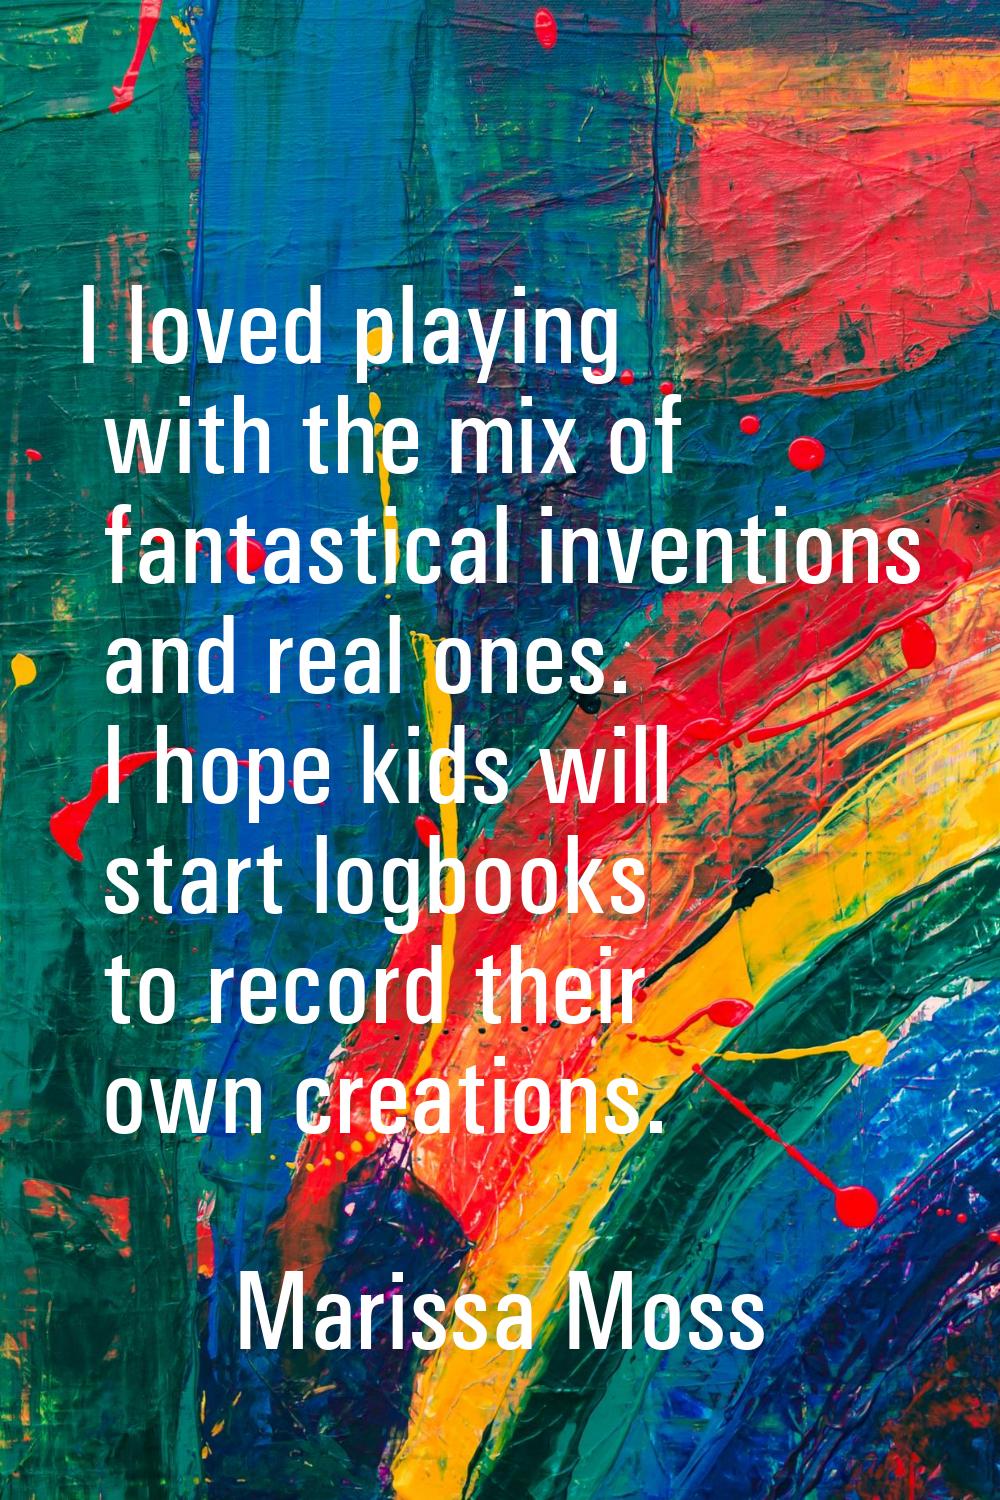 I loved playing with the mix of fantastical inventions and real ones. I hope kids will start logboo